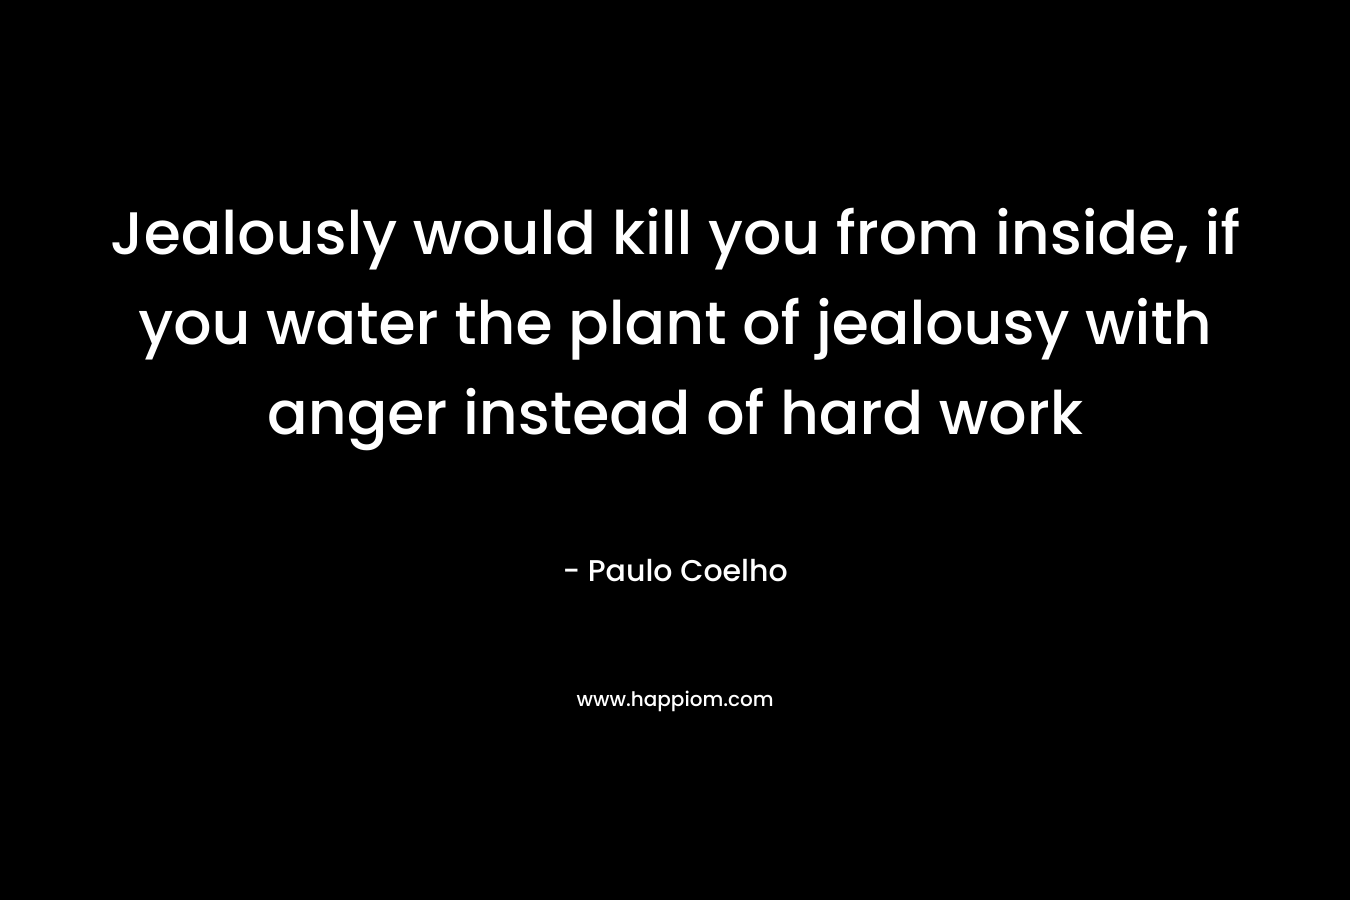 Jealously would kill you from inside, if you water the plant of jealousy with anger instead of hard work